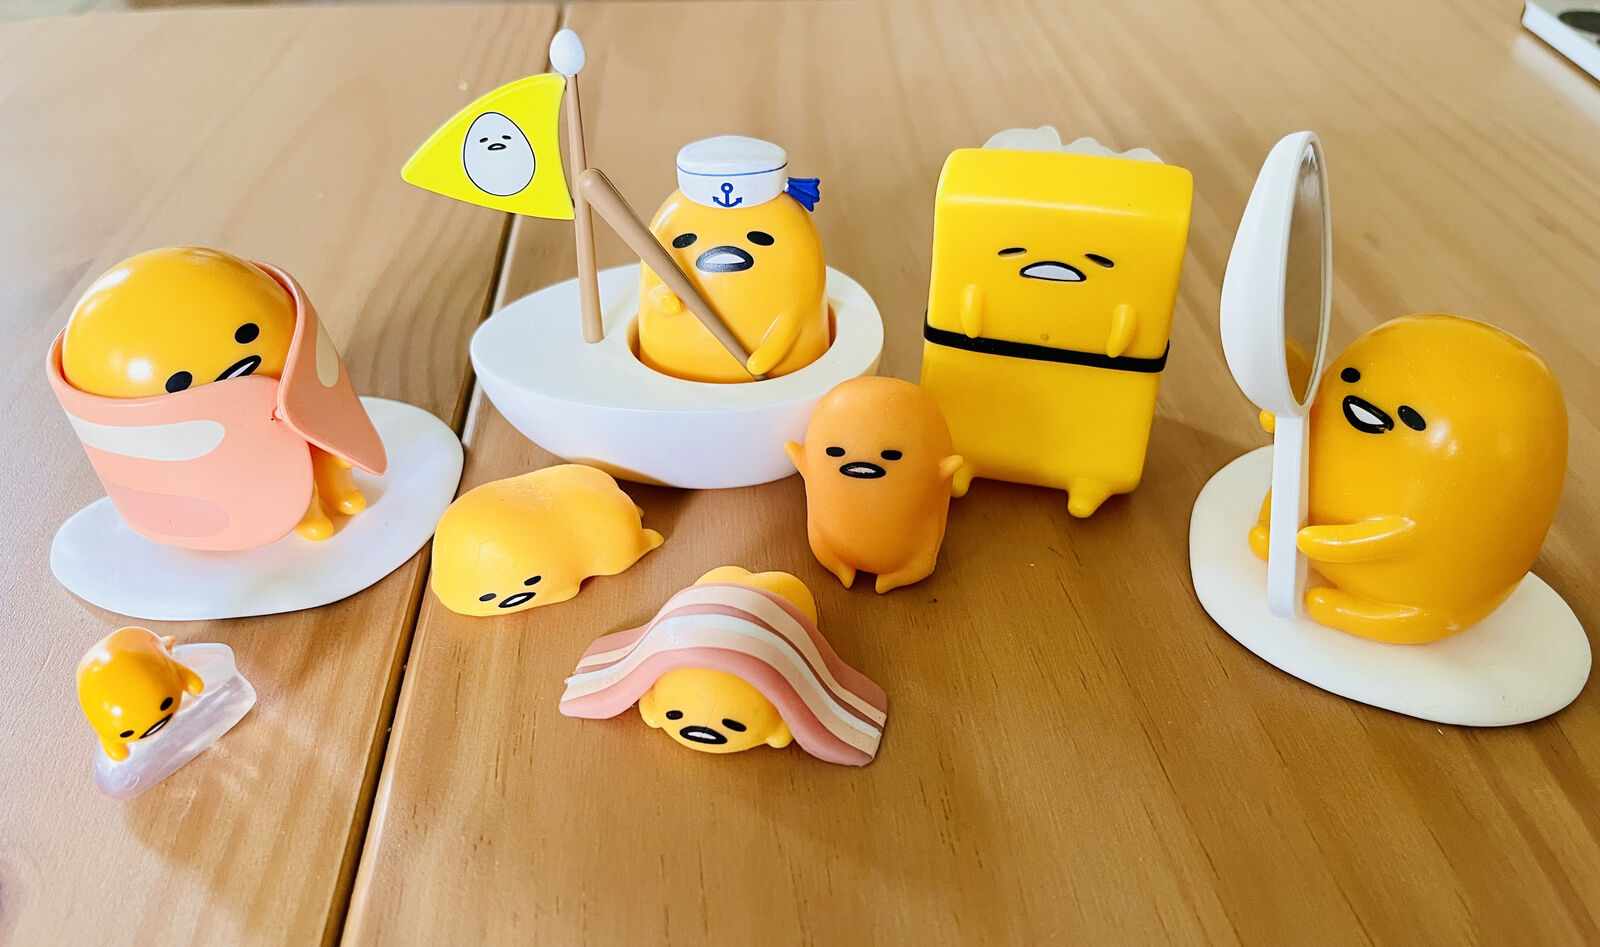 8 Cute Yellow Gudetama Figures Set - PVC Doll Toy Cake Toppers Collection Decor